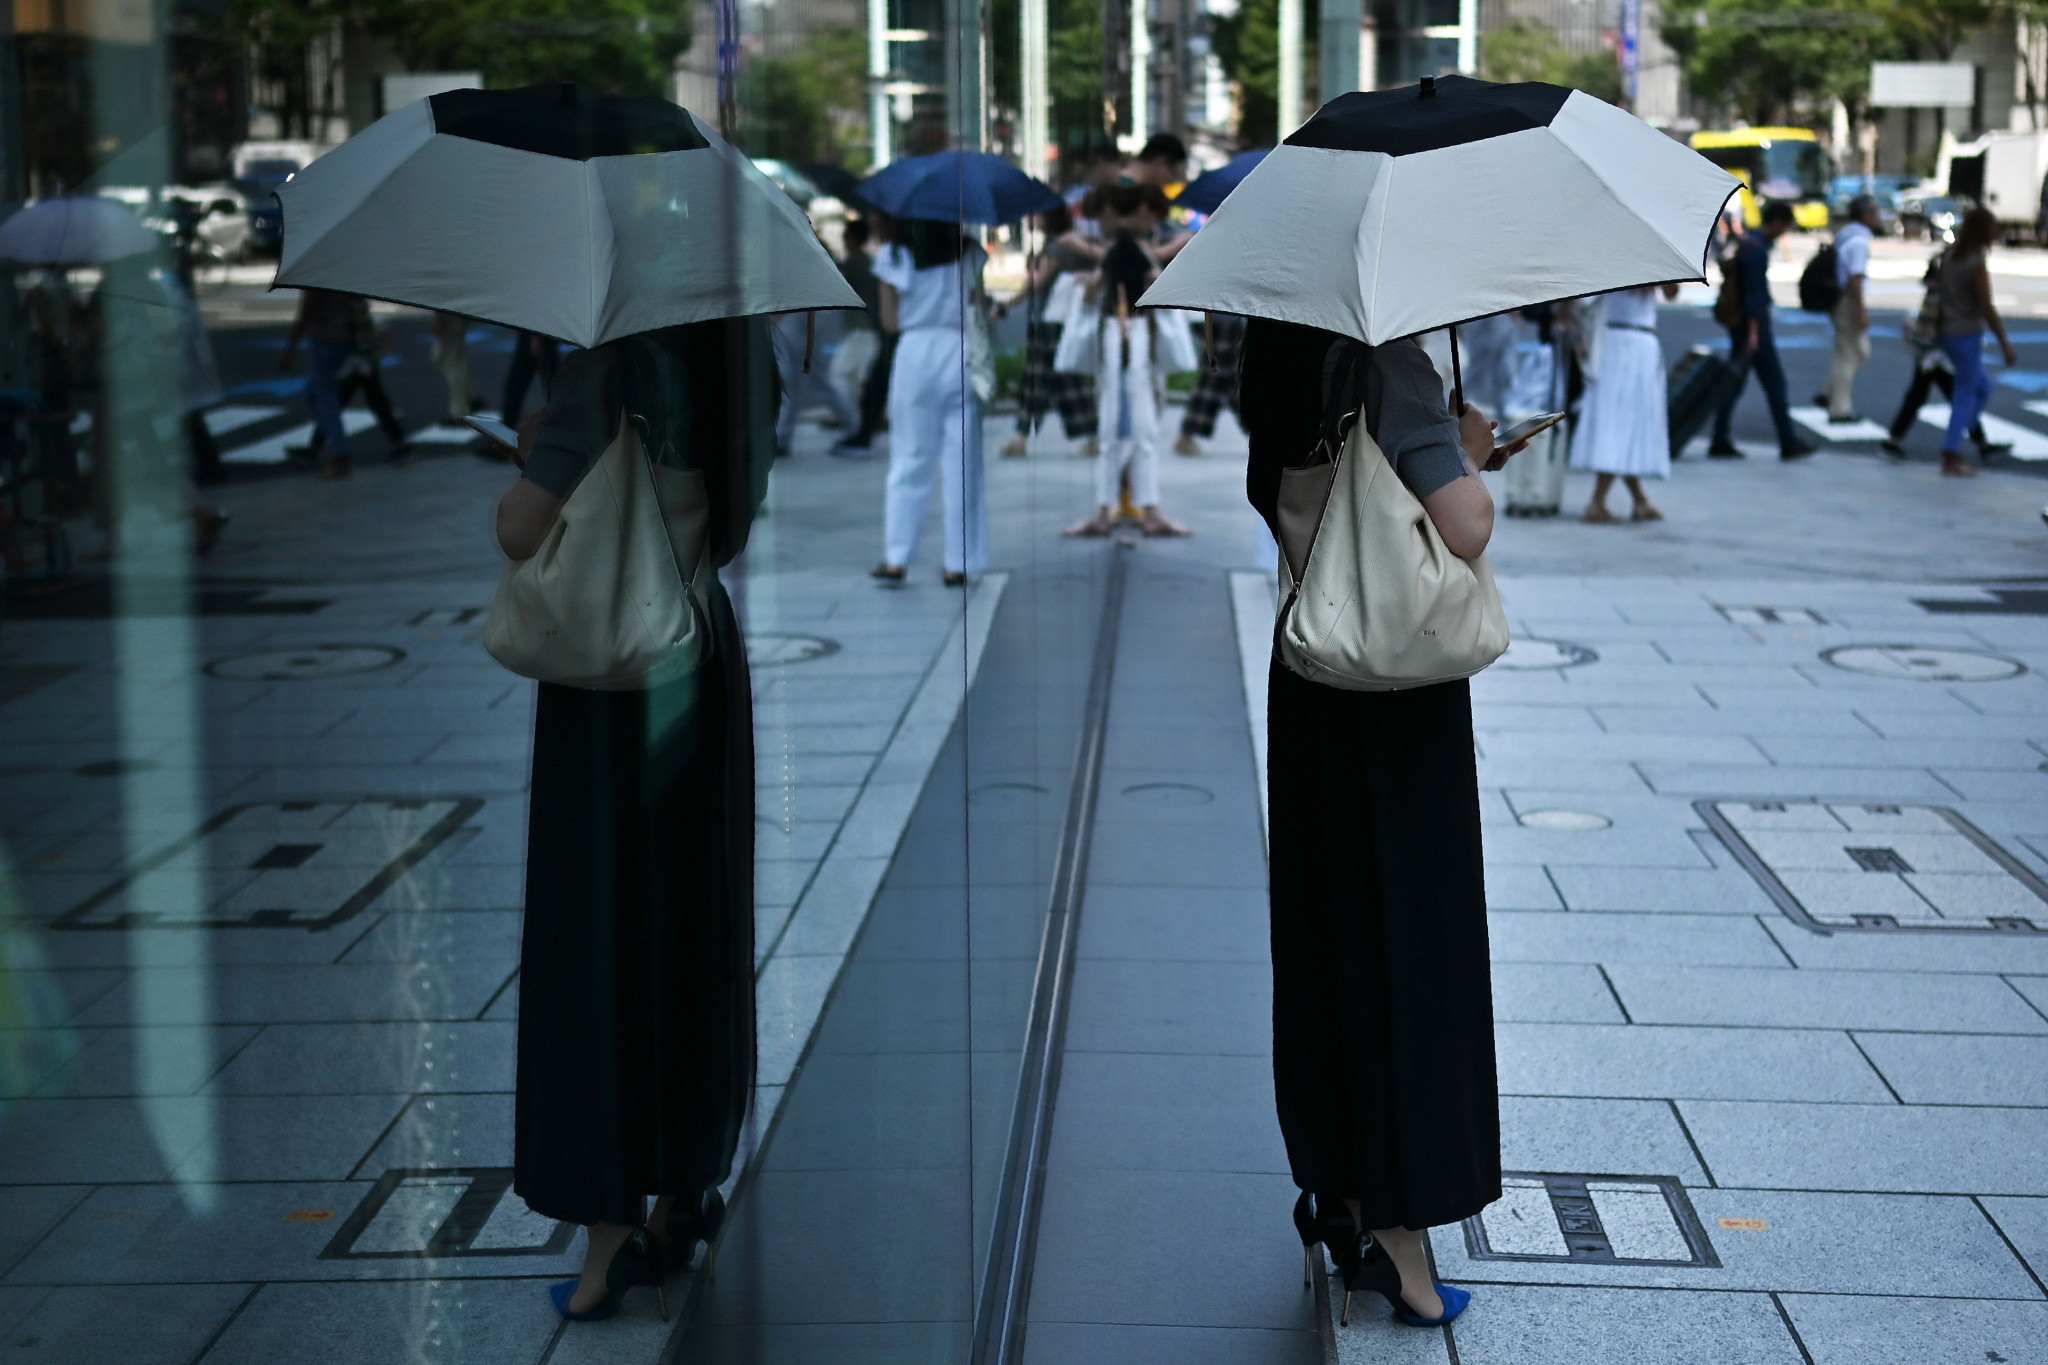 People in Japan have resorted to using umbrellas to shield themselves from soaring temperatures ©Getty Images